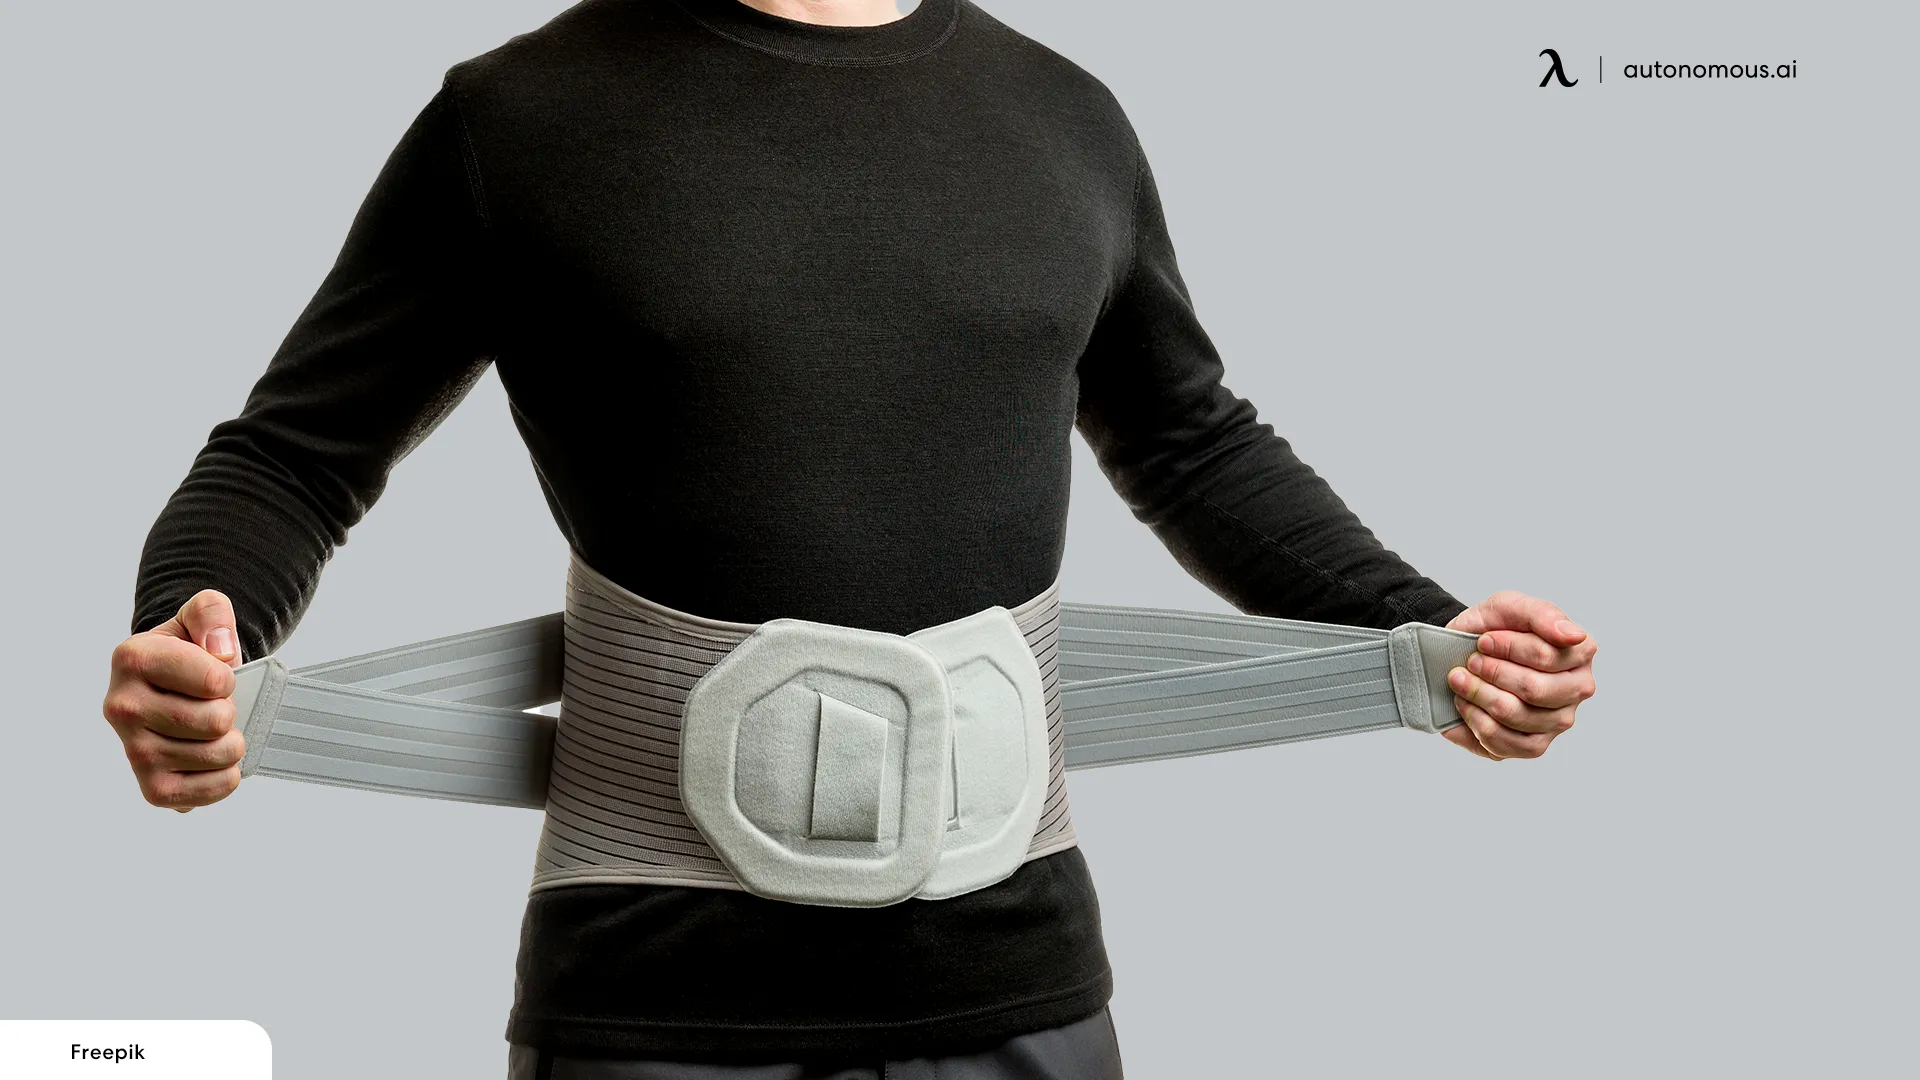 Use a Back Brace for Spinal Support